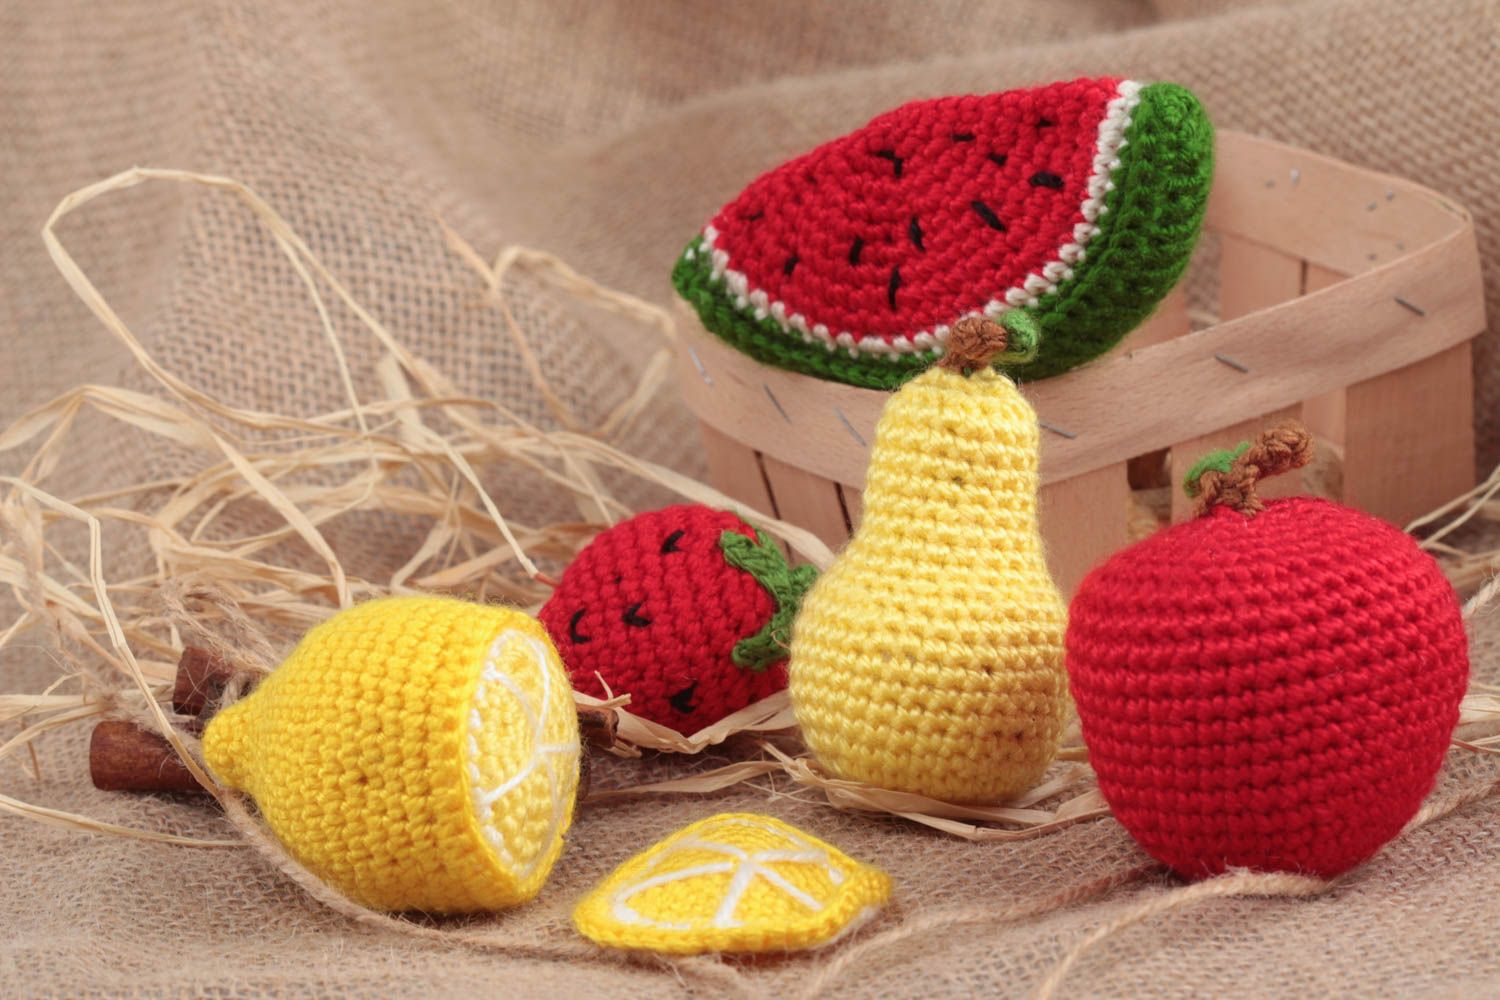 Set of 6 handmade crocheted soft colorful fruit toys for kids and interior decor photo 1